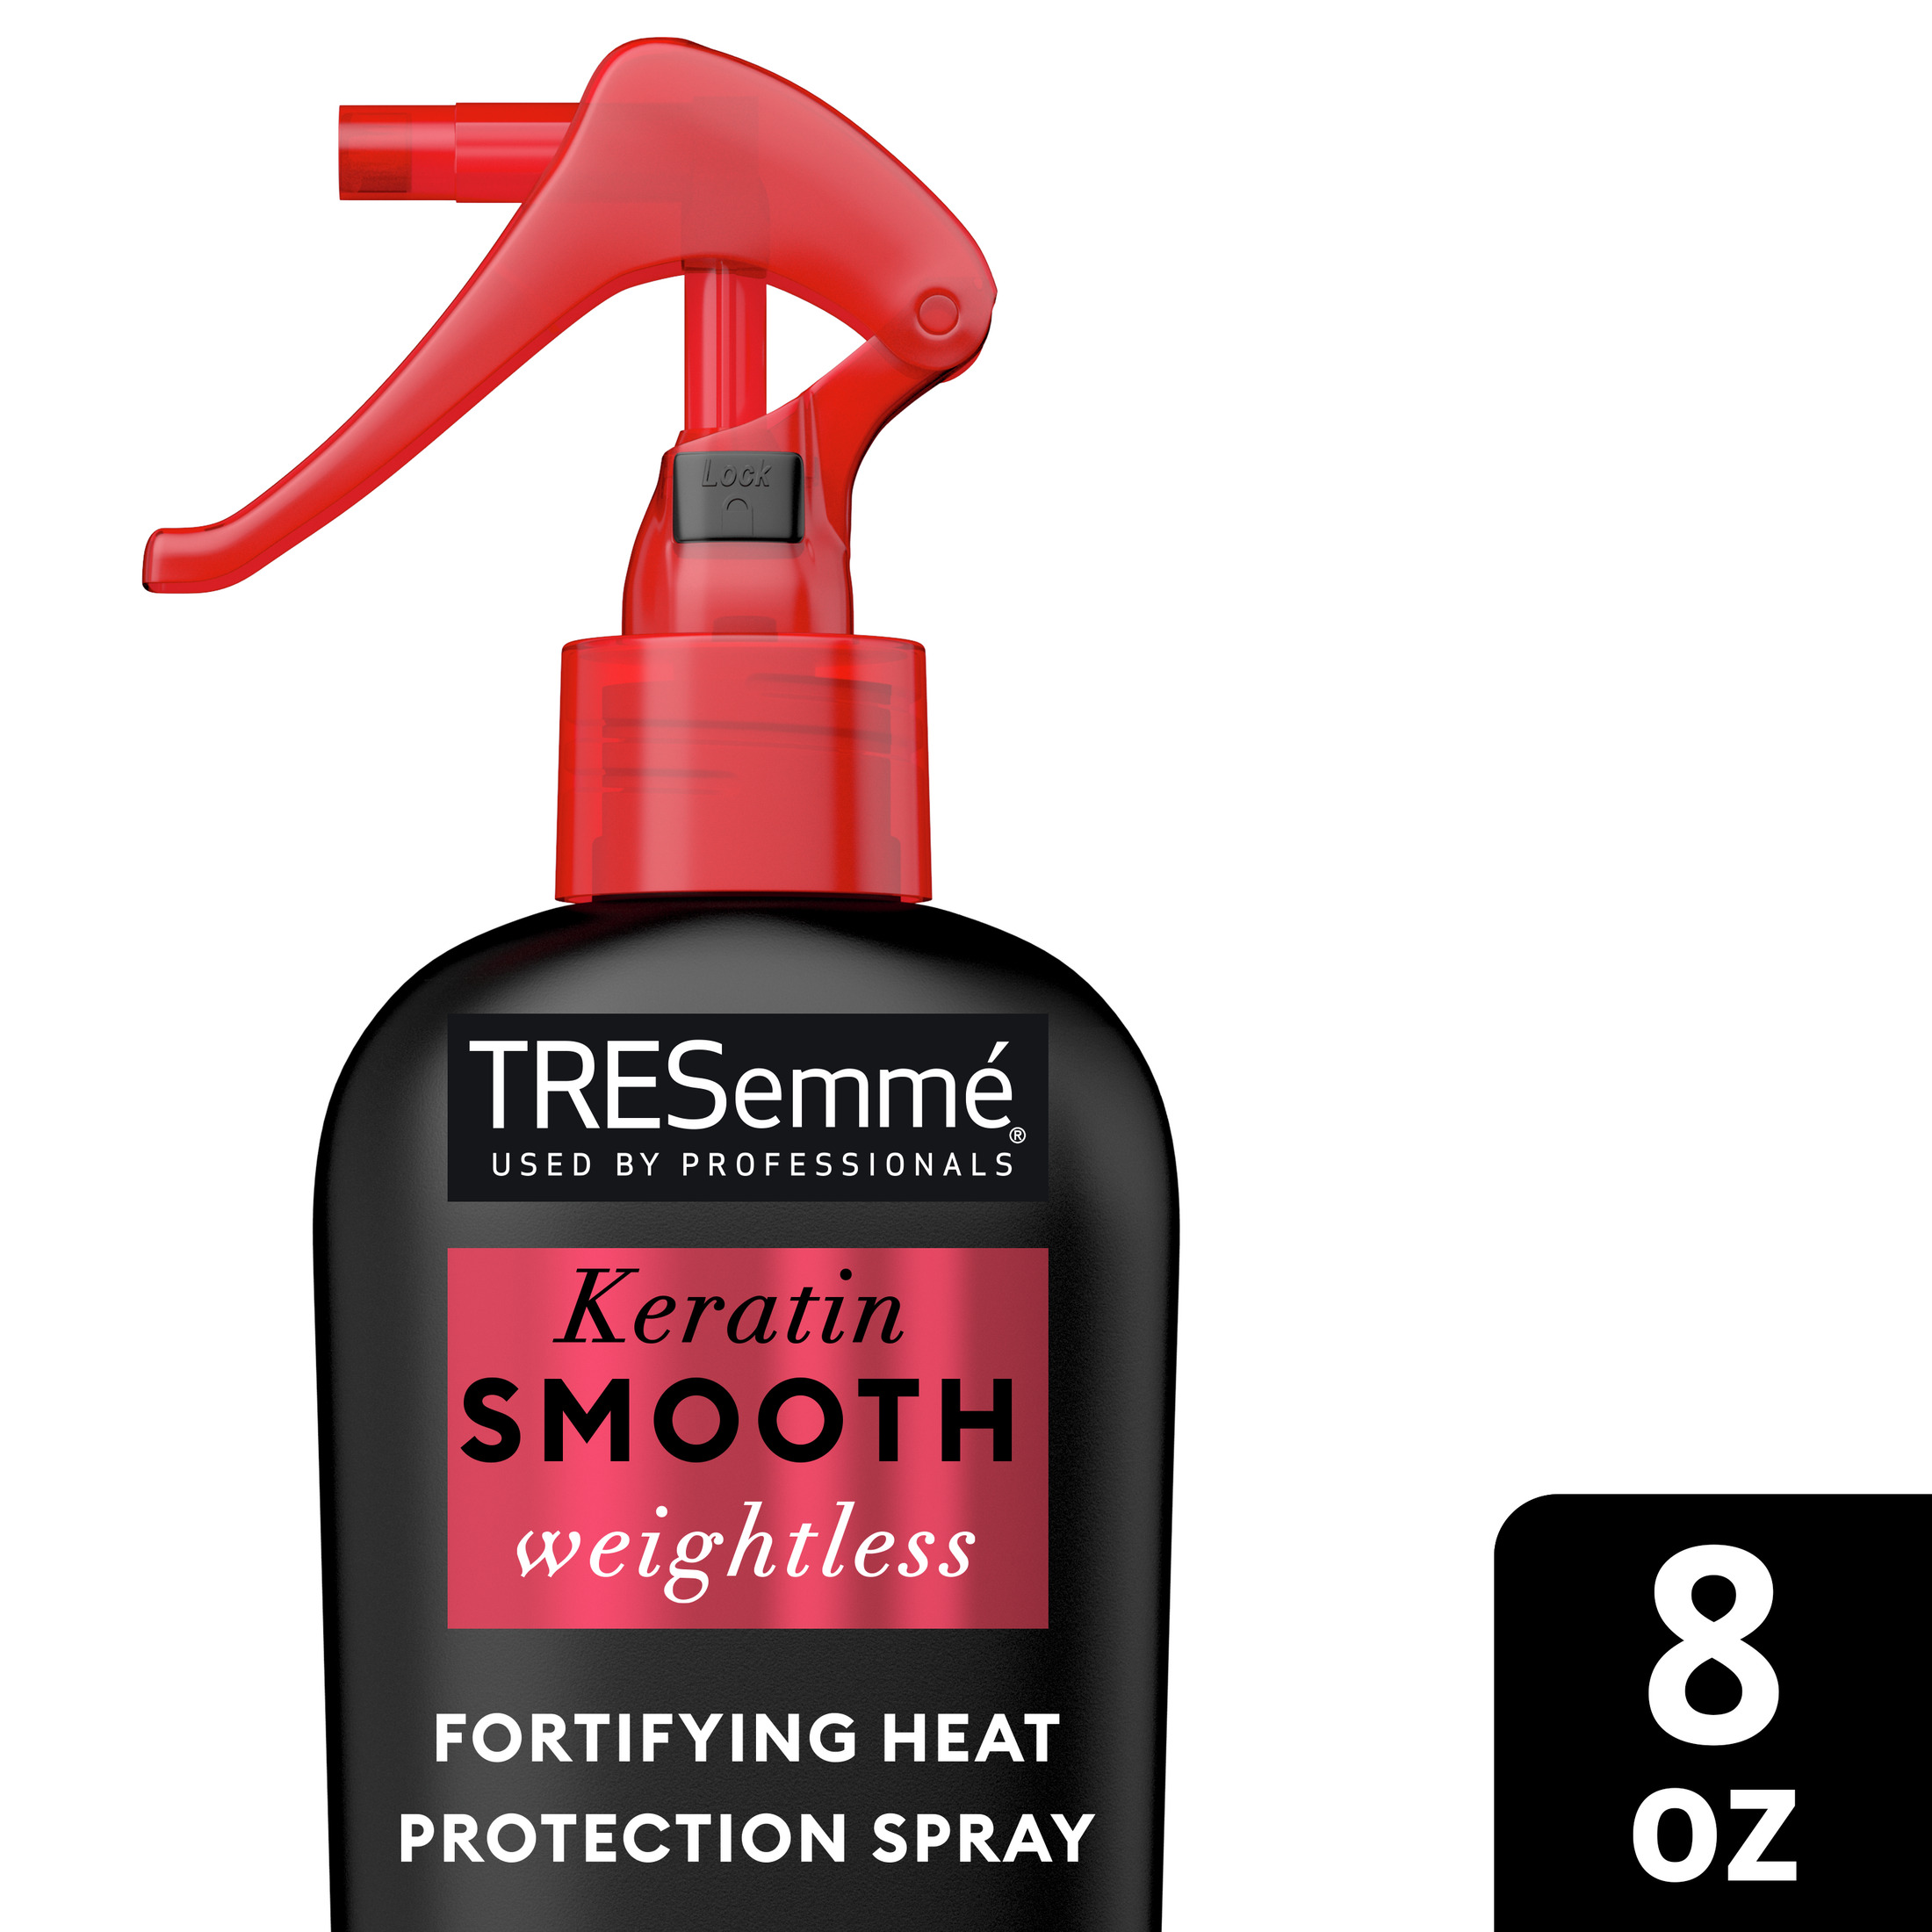 TRESemme Heat Protecting Hairspray, Keratin Smooth for Taming Frizz & Reducing Breakage, 8 oz - image 3 of 11